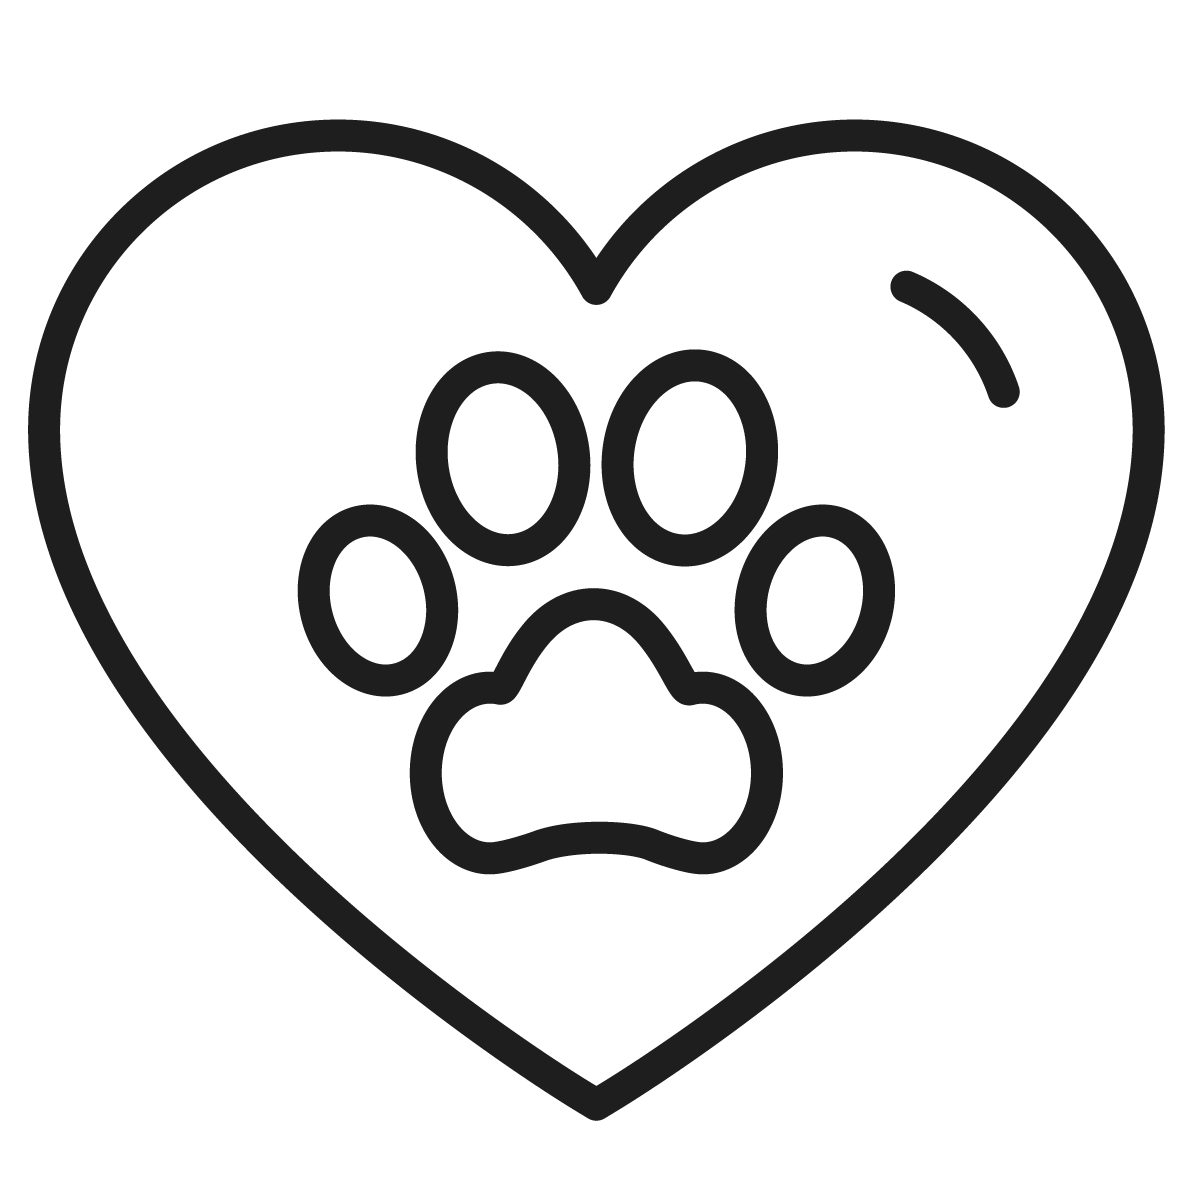 black and white outline of a paw pad inside of a heart